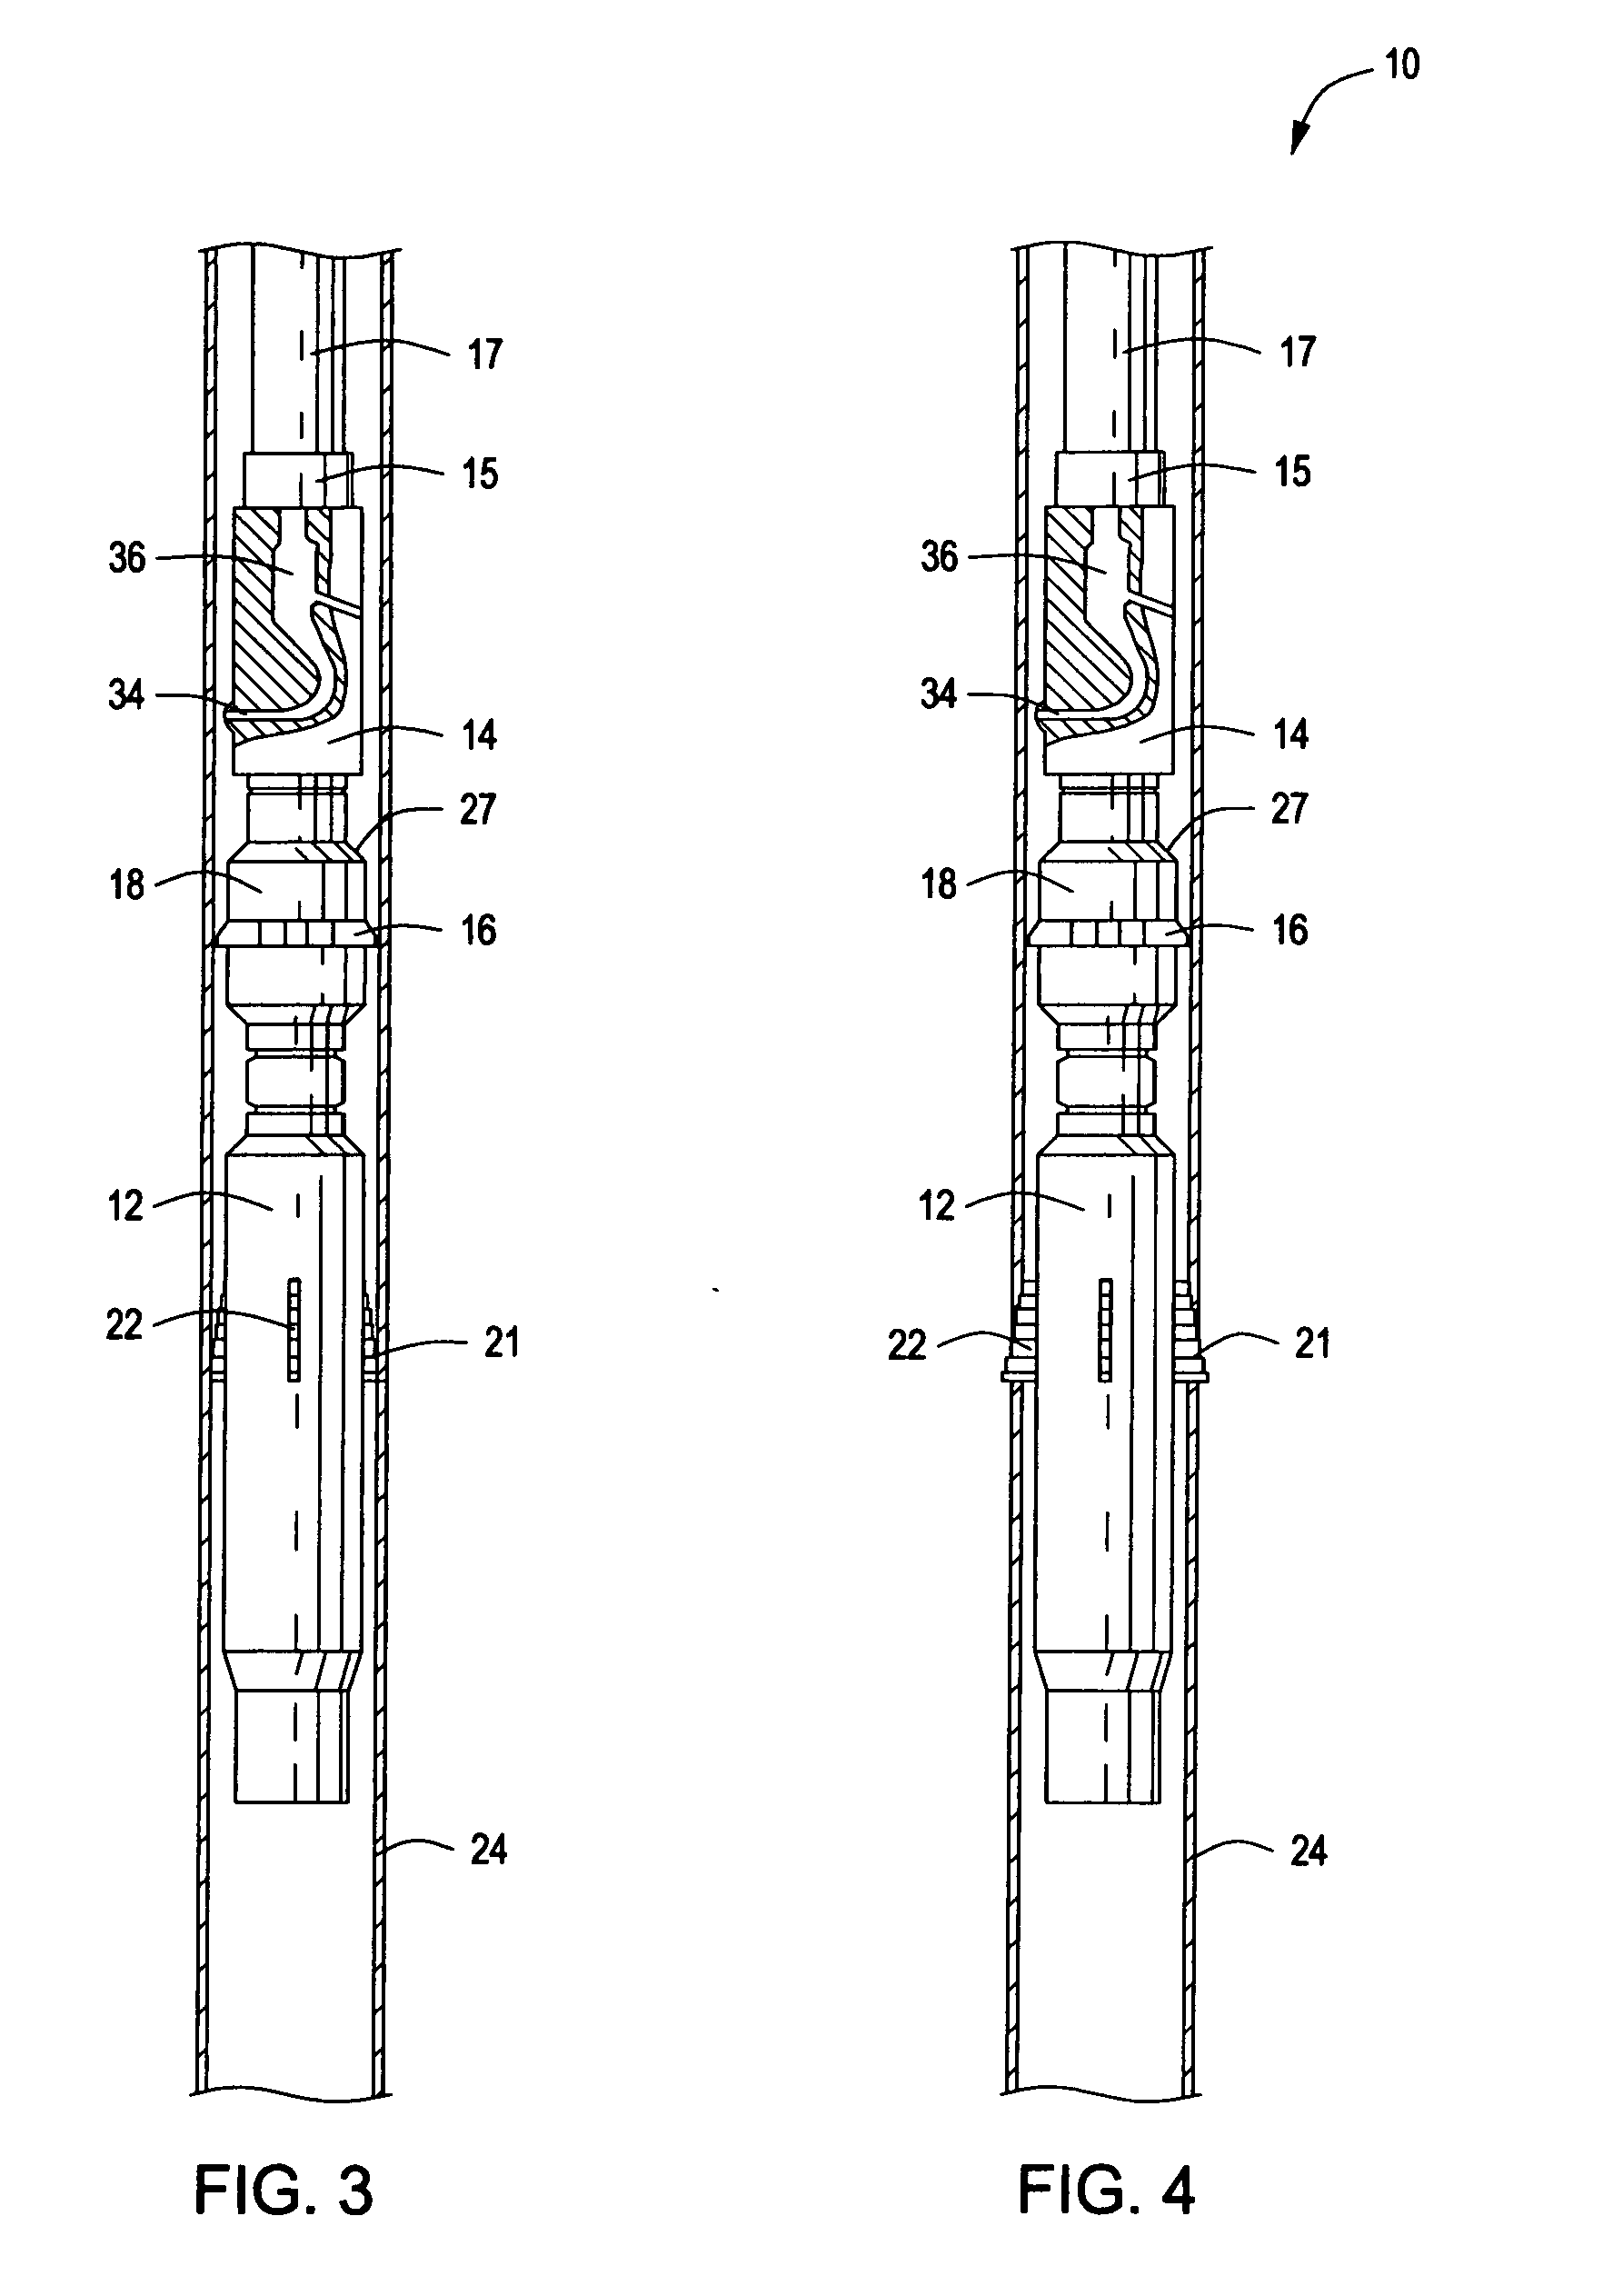 Method and apparatus for single run cutting of well casing and forming subsurface lateral passages from a well